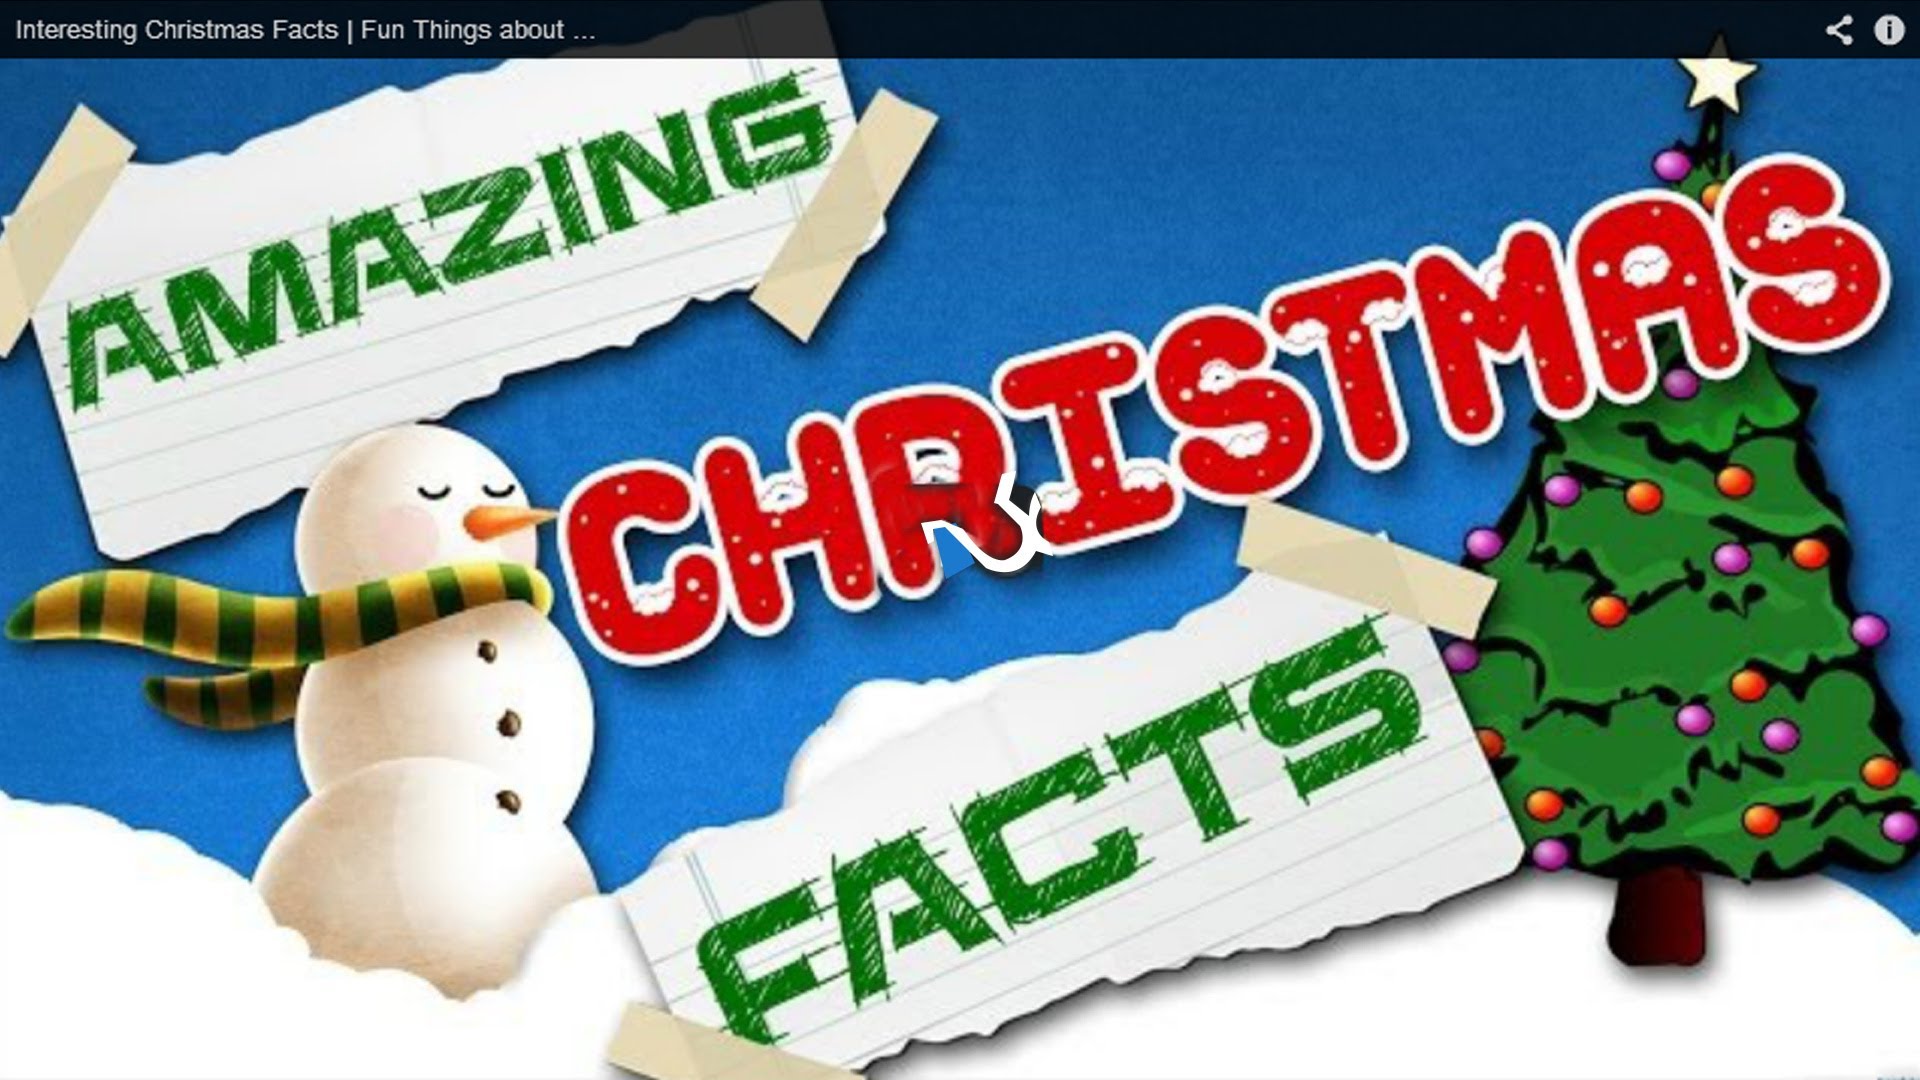 8 Crazy Christmas Facts | Fun Holiday Xmas Facts You Didn't Know ...